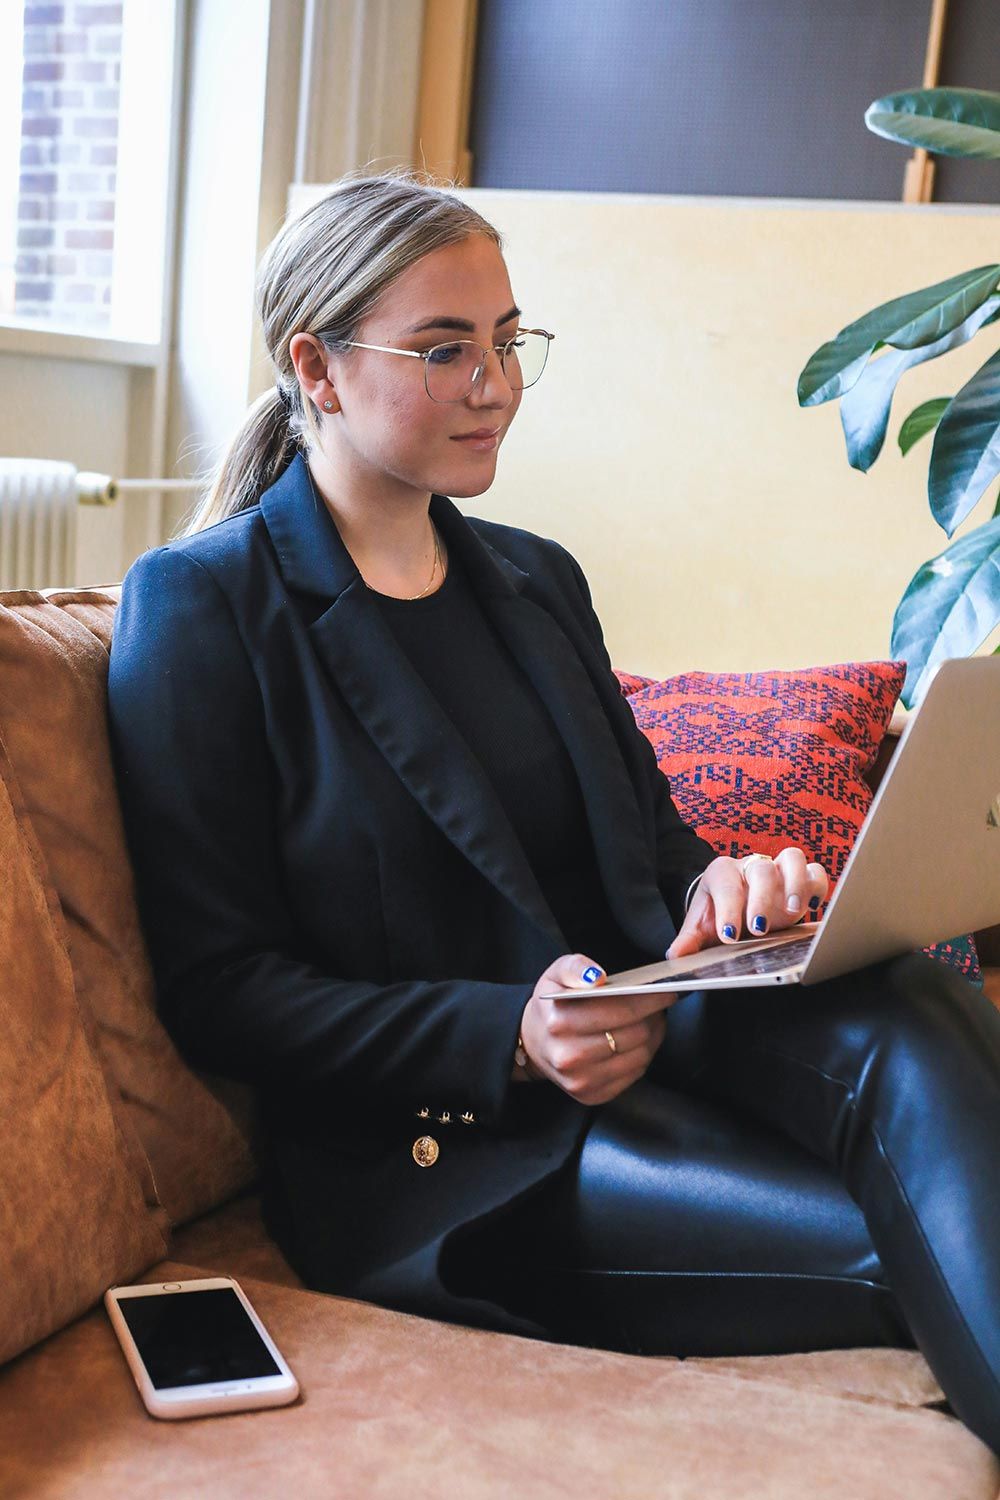 Woman in a black blazer working on a laptop with a smartphone placed on the couch next to her.